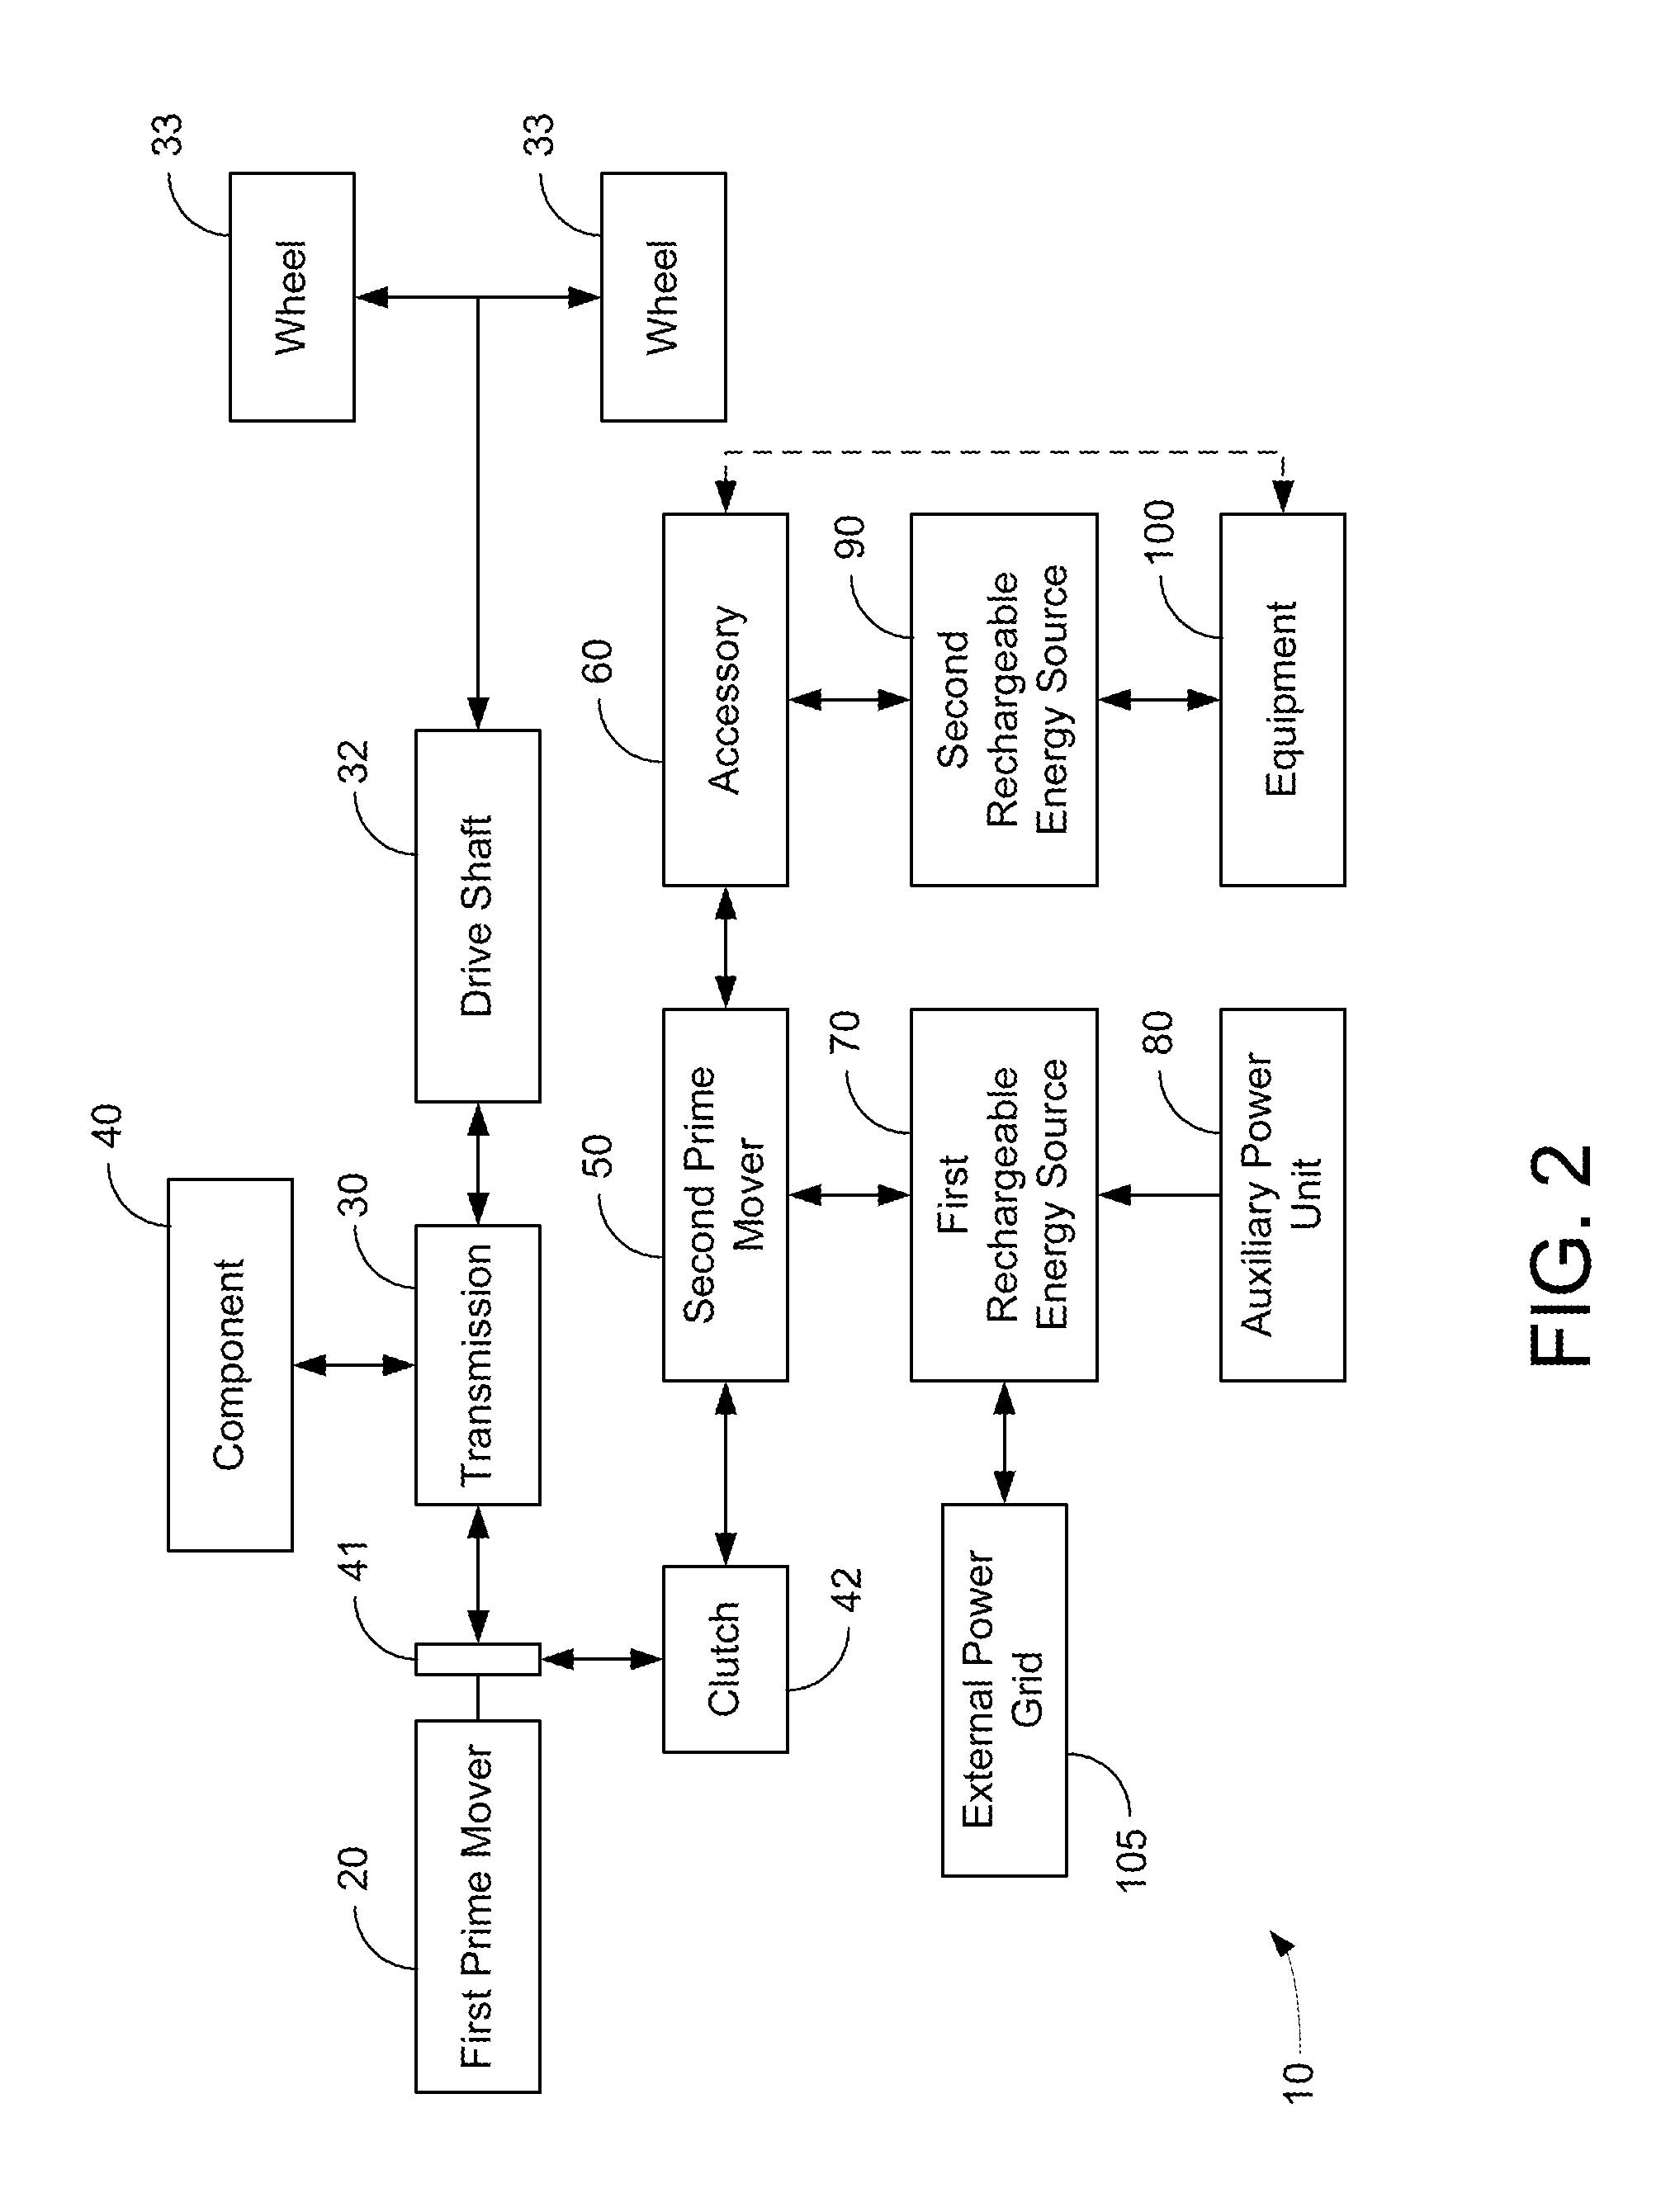 Hybrid vehicle drive system and method for fuel reduction during idle